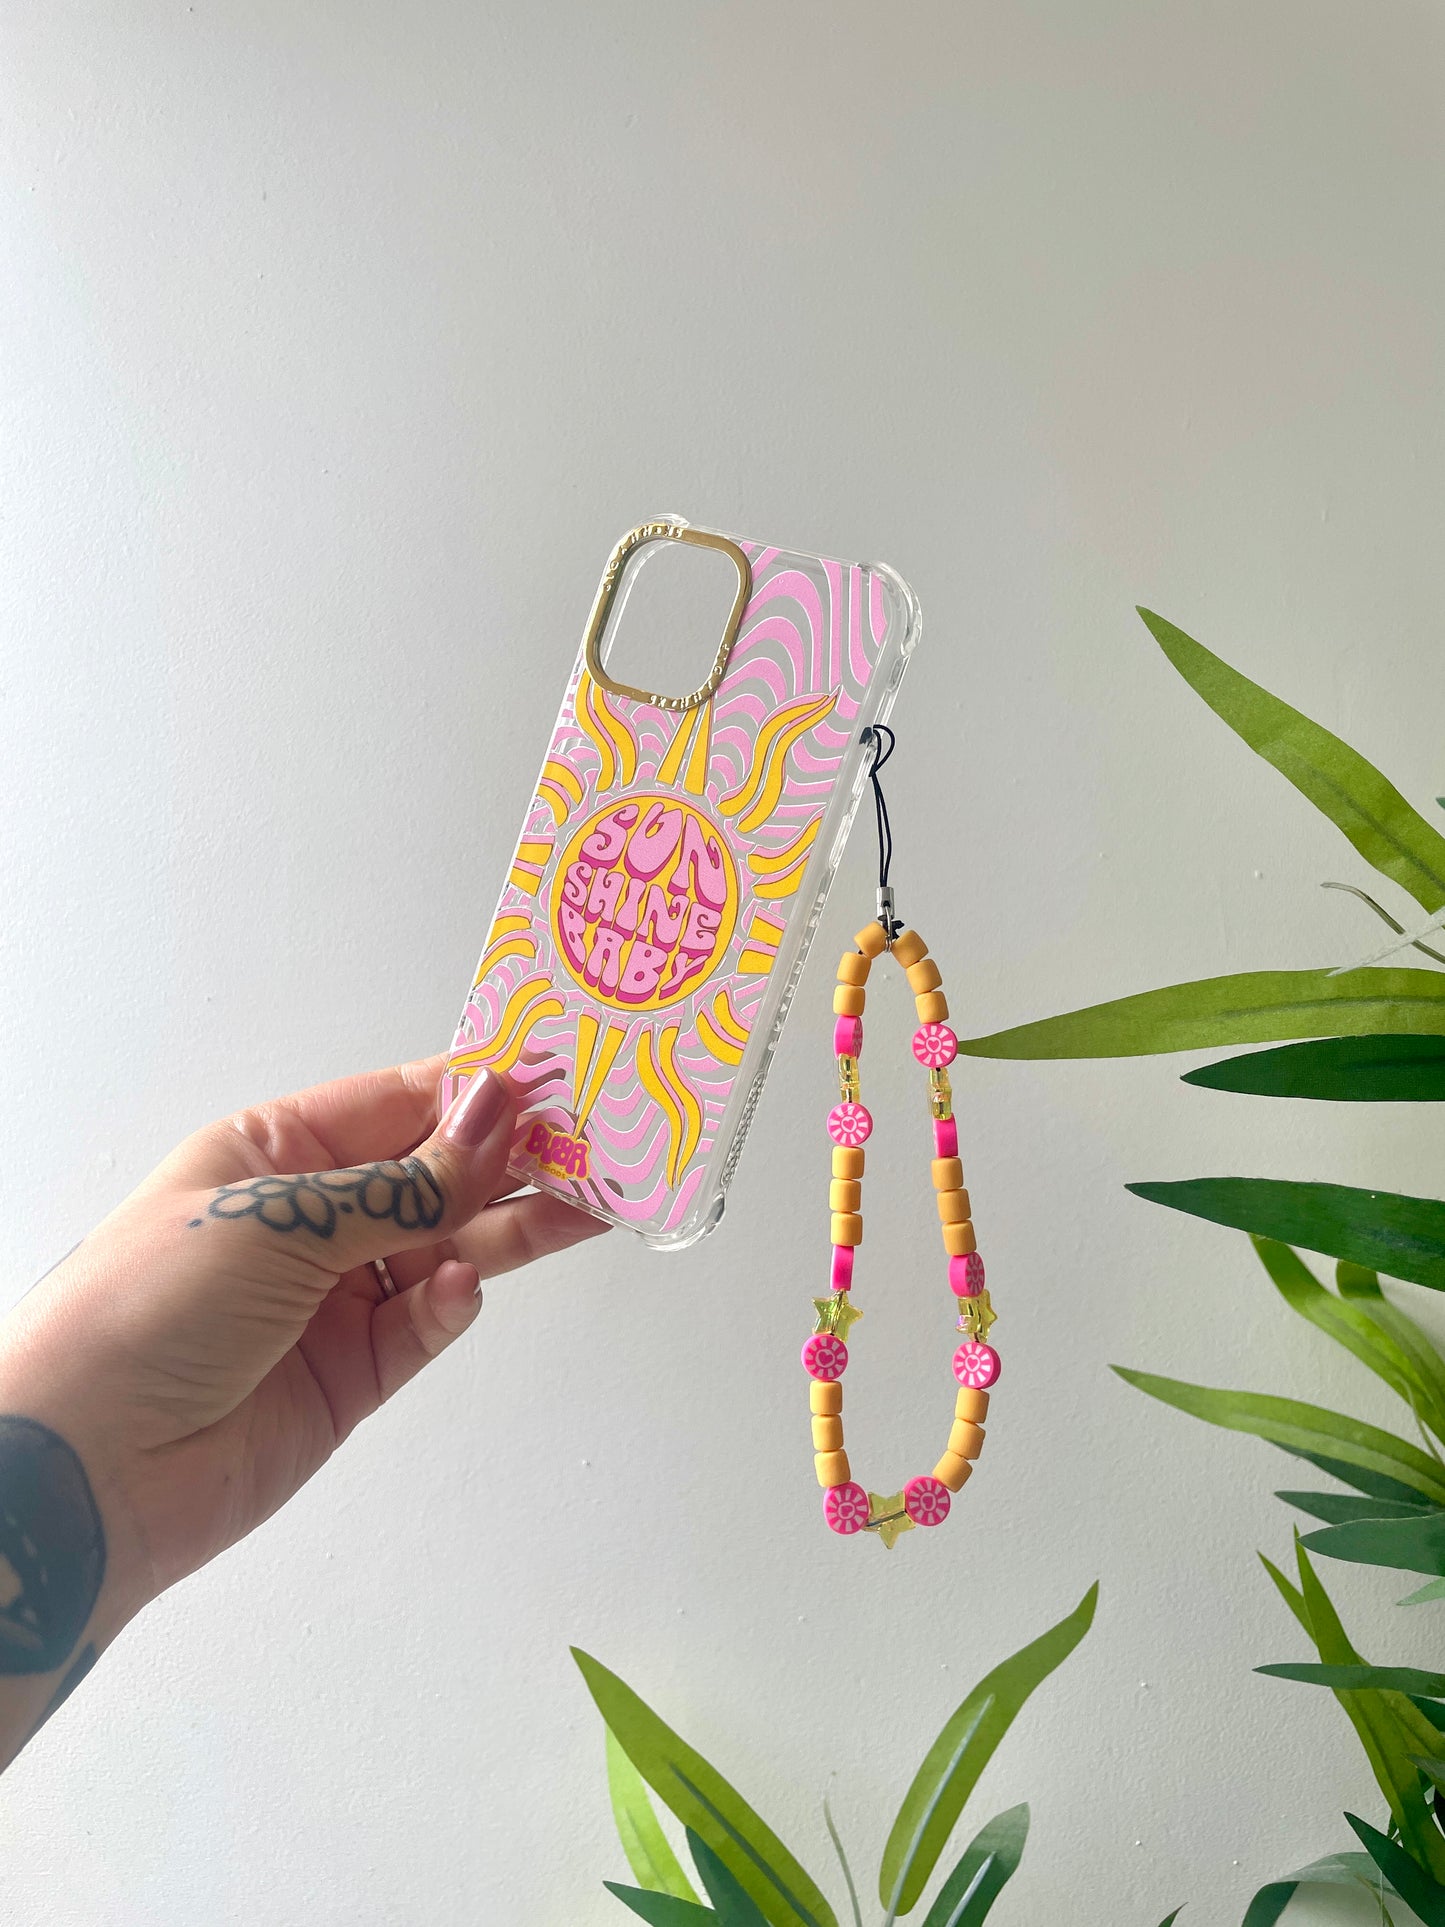 BUBA GOODS x SKINNYDIP limited edition yellow and pink mobile phone charm strap